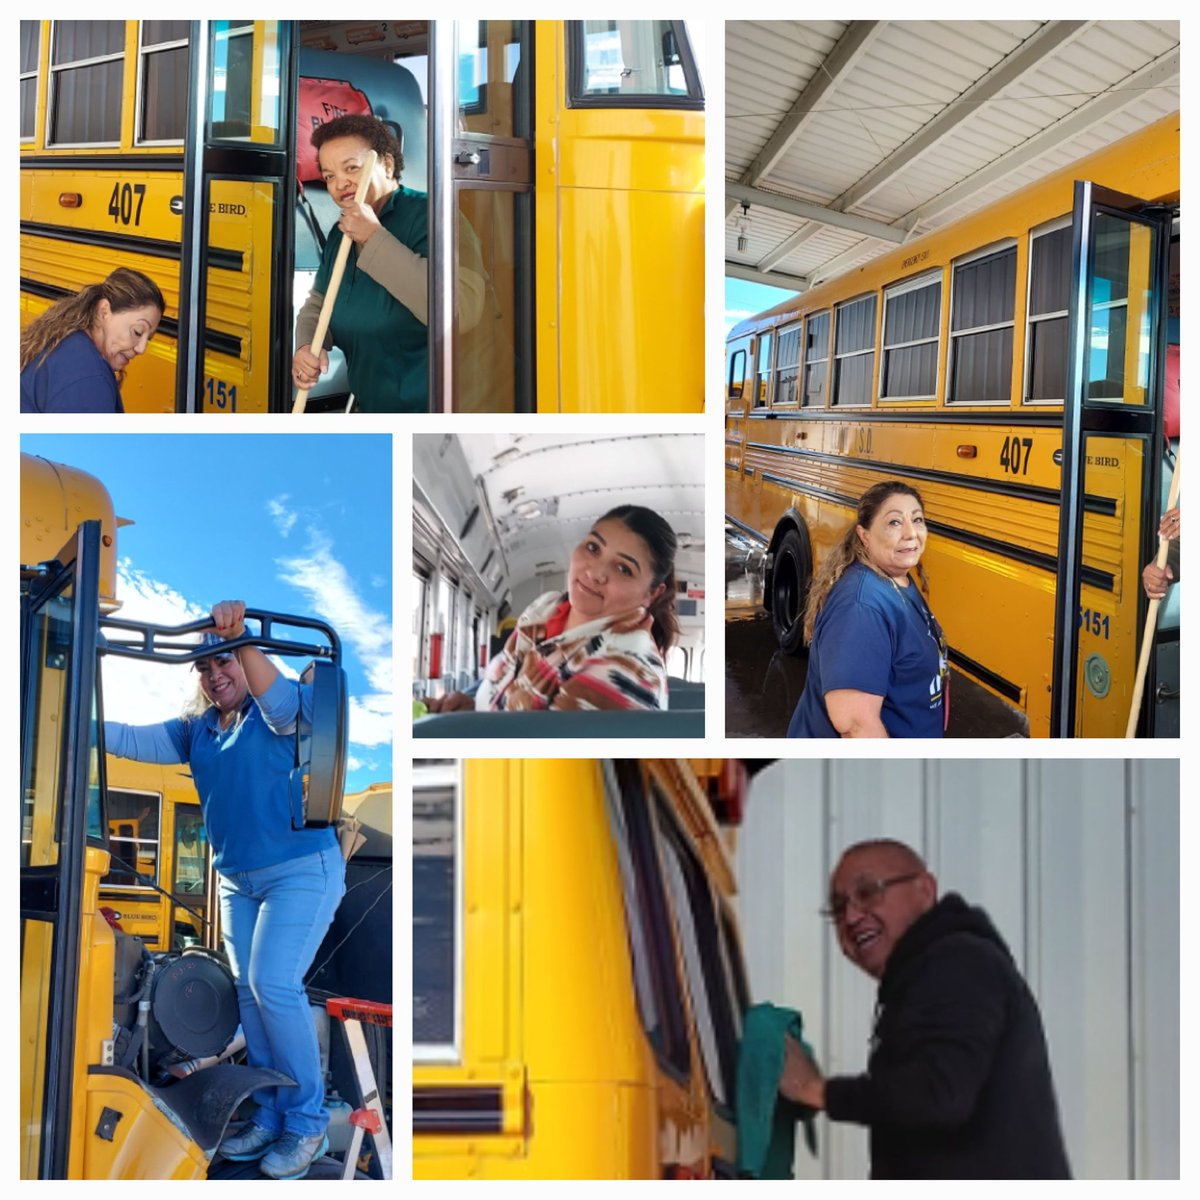 Always getting our buses ready for our Kids! Great work always on display at Clint ISD Transportation Department.  #ThatsHowWeRoll